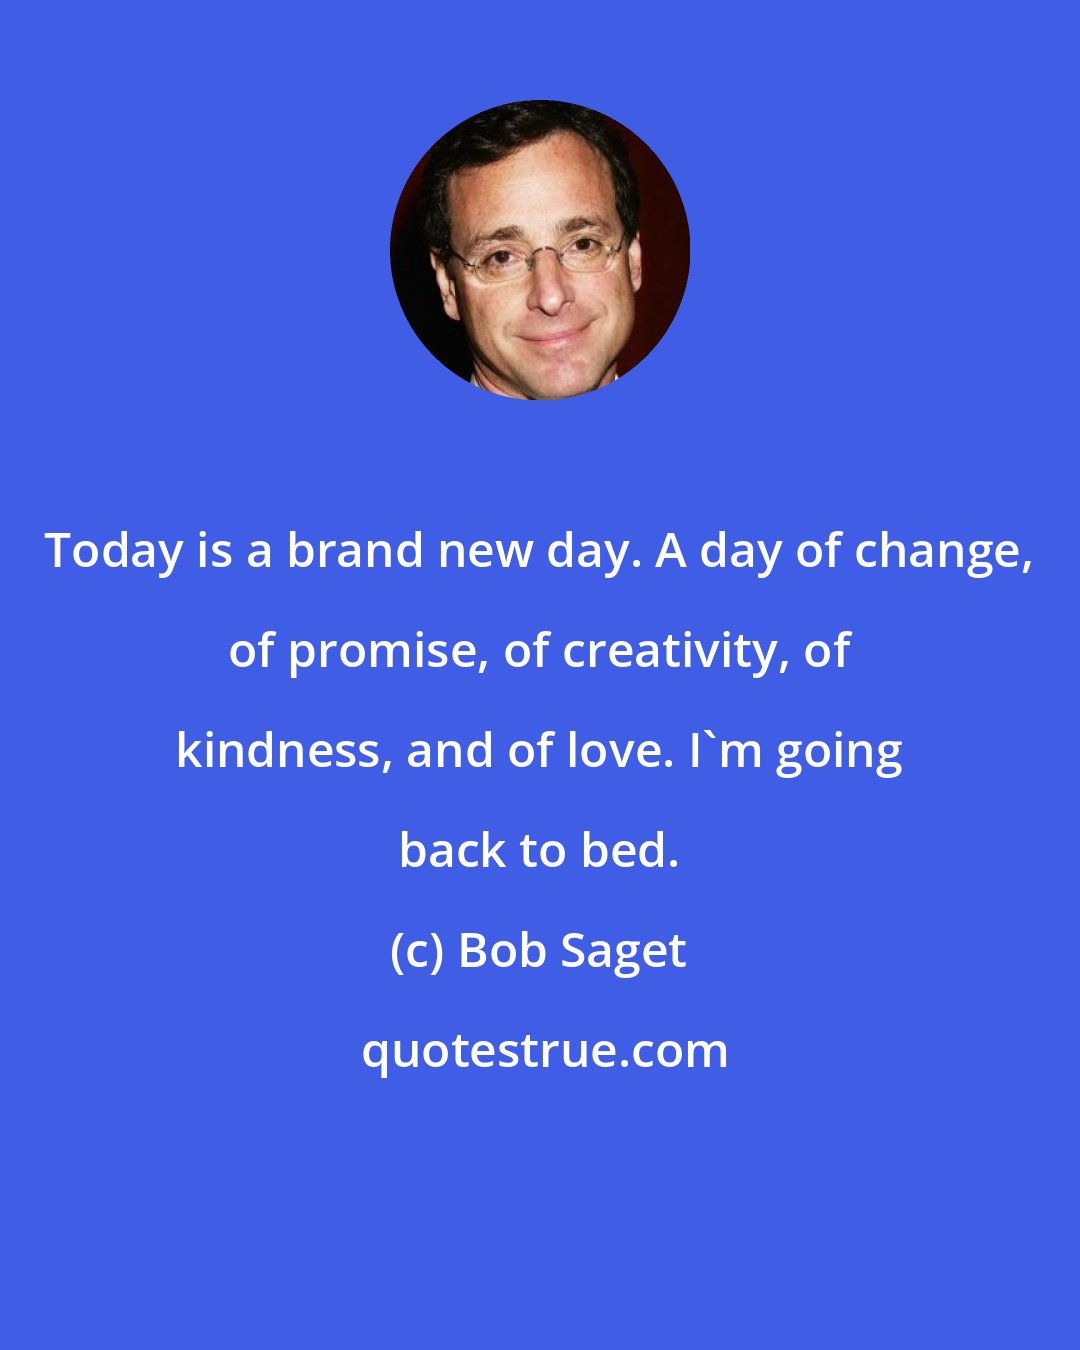 Bob Saget: Today is a brand new day. A day of change, of promise, of creativity, of kindness, and of love. I'm going back to bed.